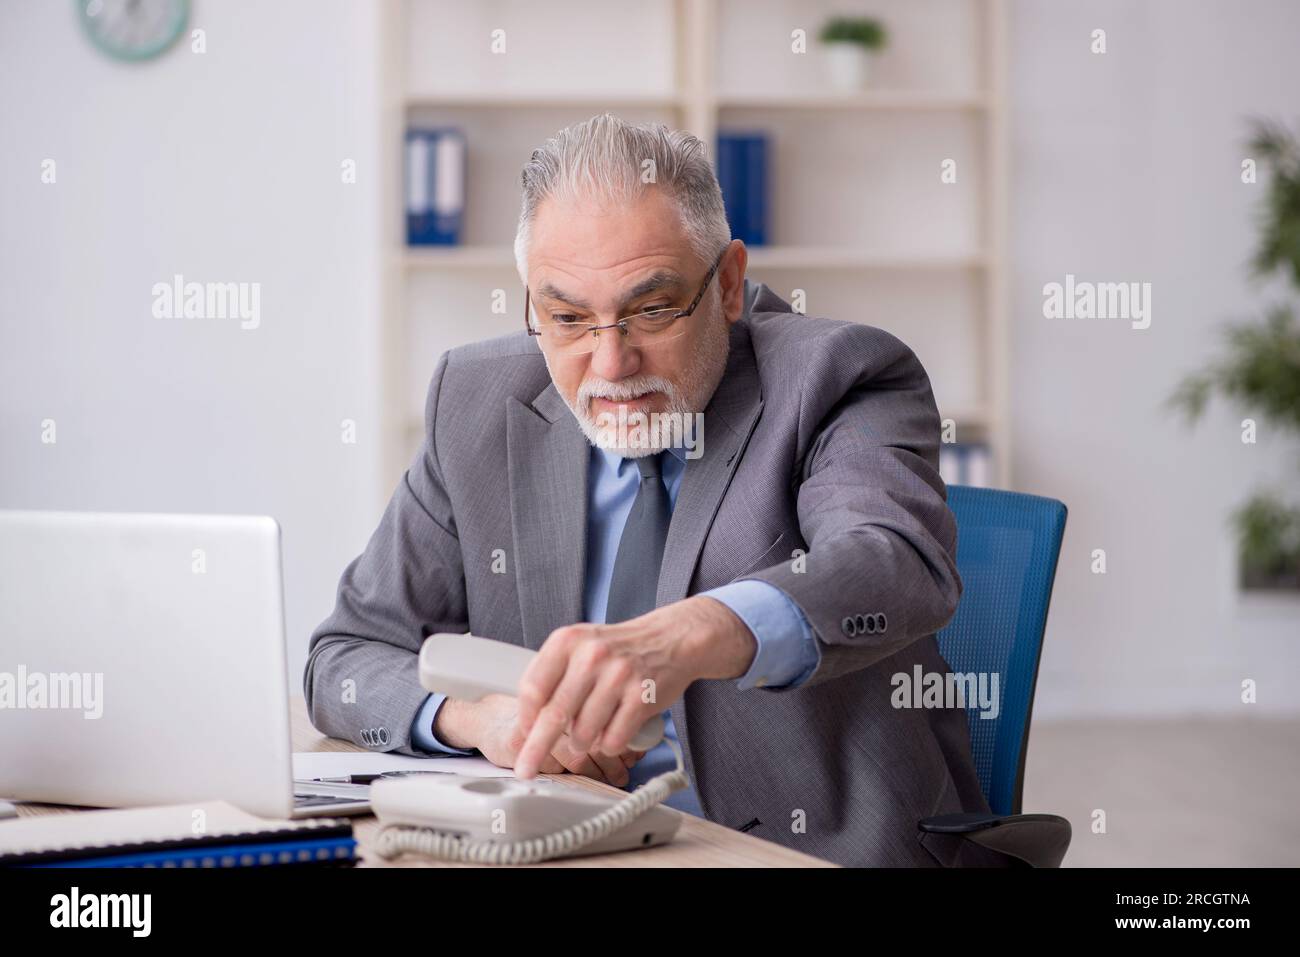 Old employee speaking by phone at workplace Stock Photo